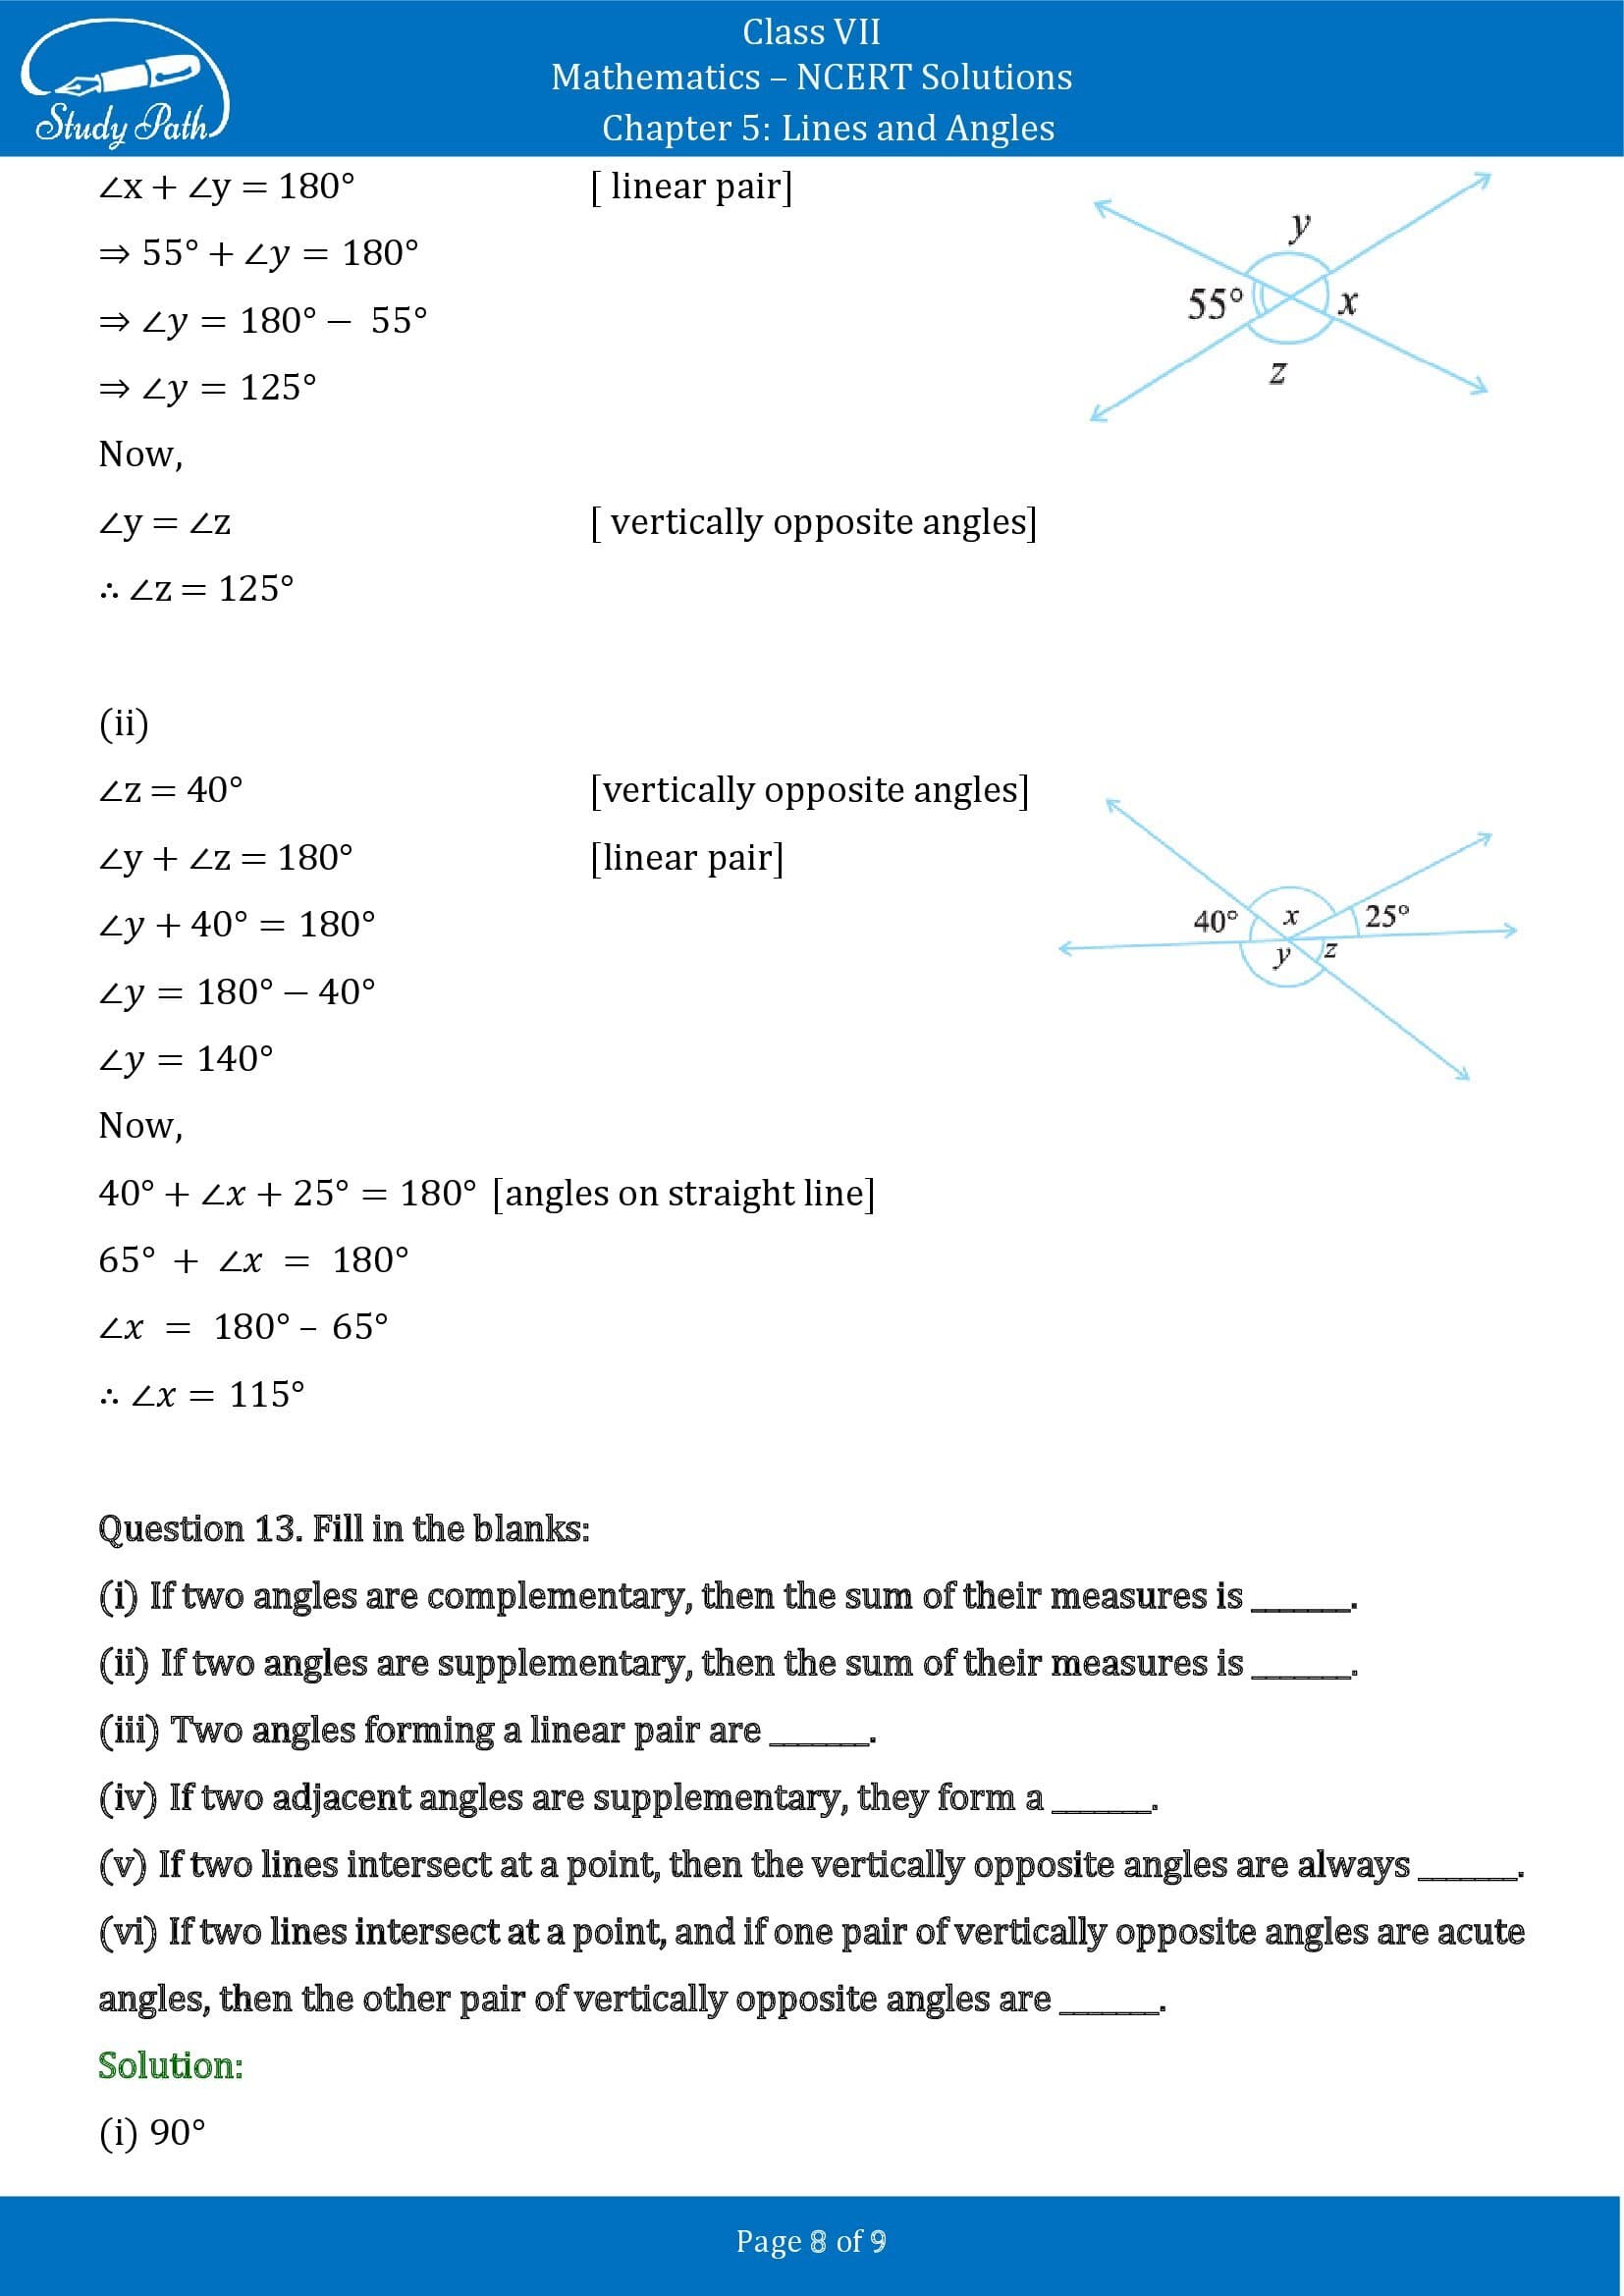 NCERT Solutions for Class 7 Maths Chapter 5 Lines and Angles Exercise 5.1 00008